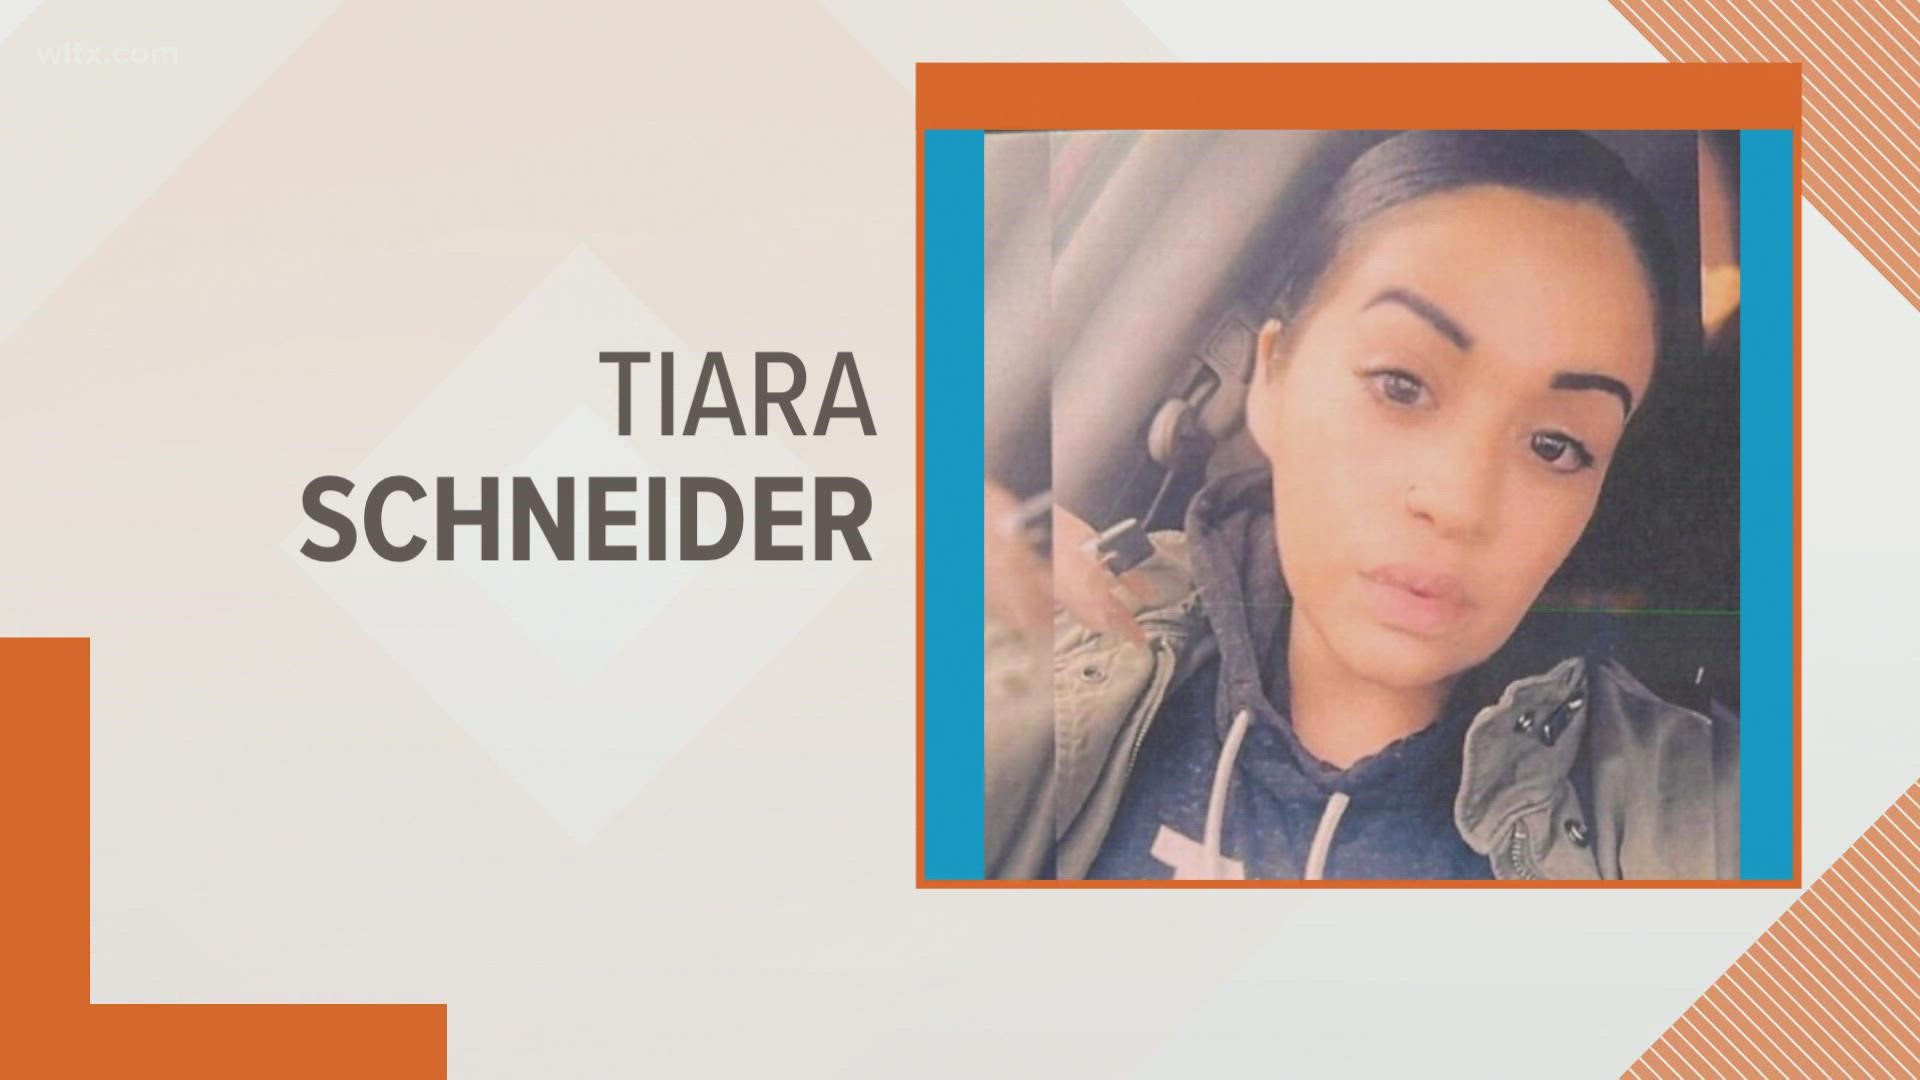 Orangeburg Department of Public Safety officers are searching for Tiara Schneider, a woman who's been missing for over a month.